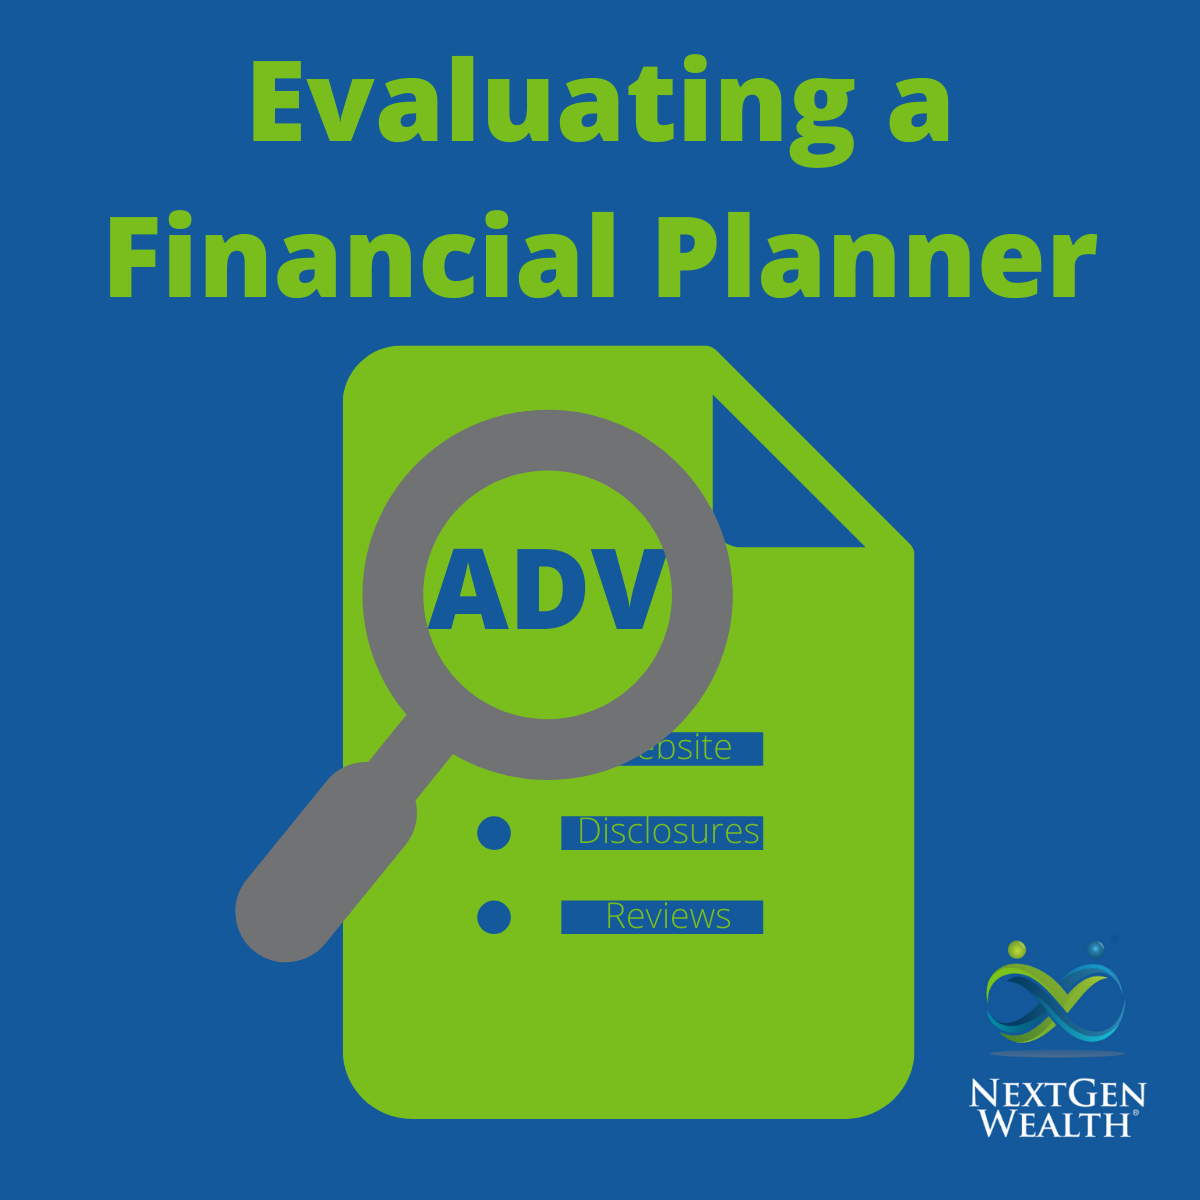 Evaluating a Financial Planner